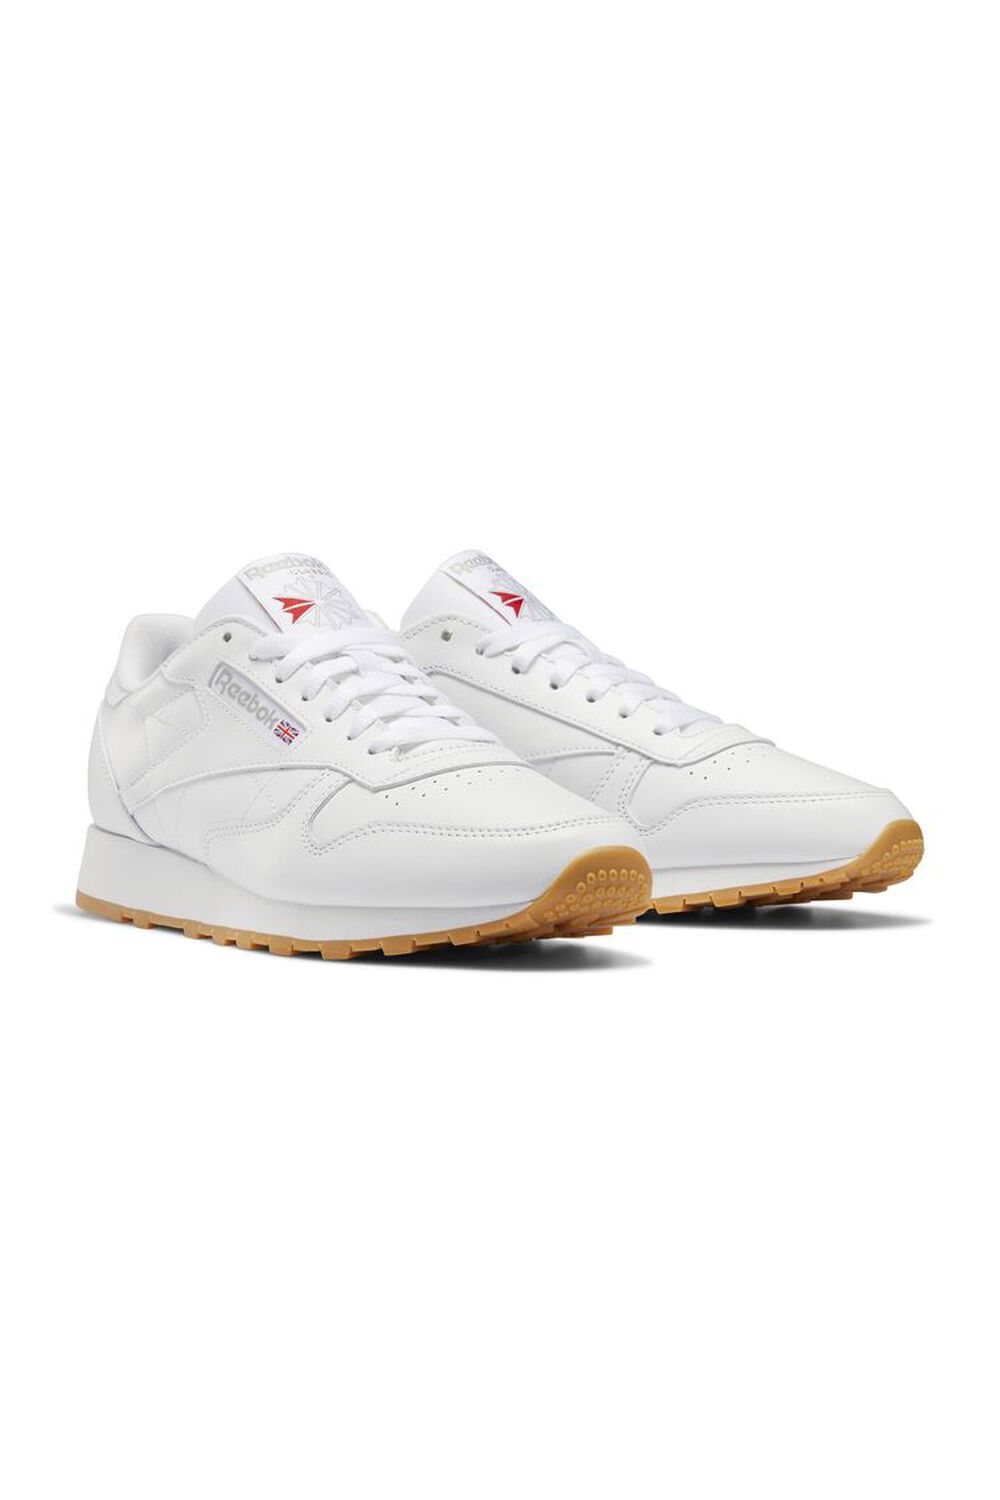 WHITE Men Reebok Classic Leather Shoes, image 1